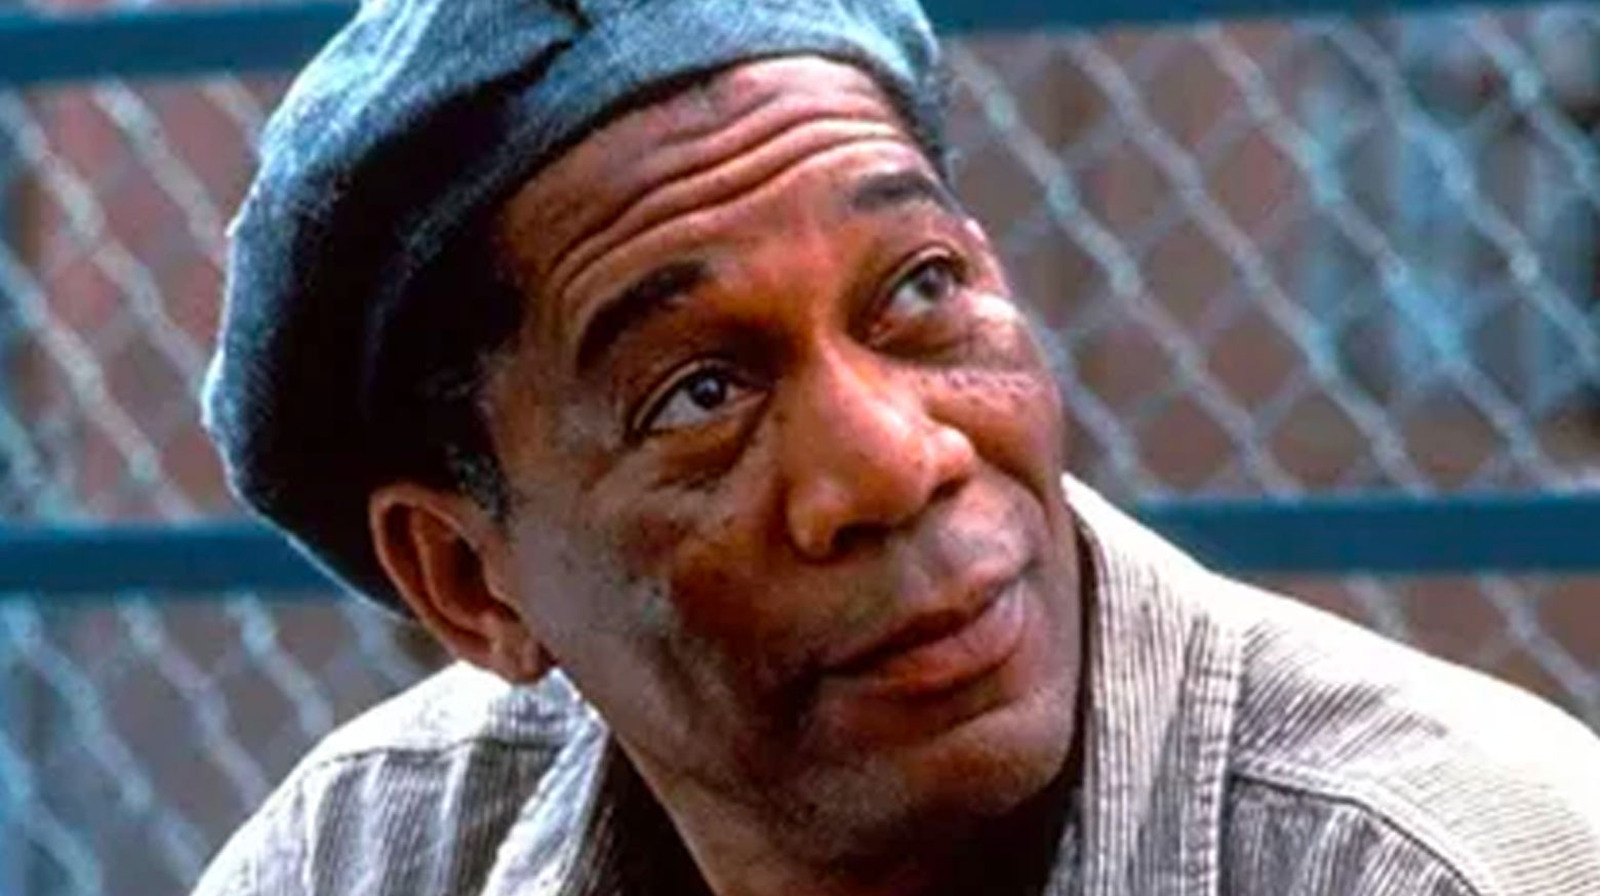 The Real From Shawshank Redemption Was In Prison